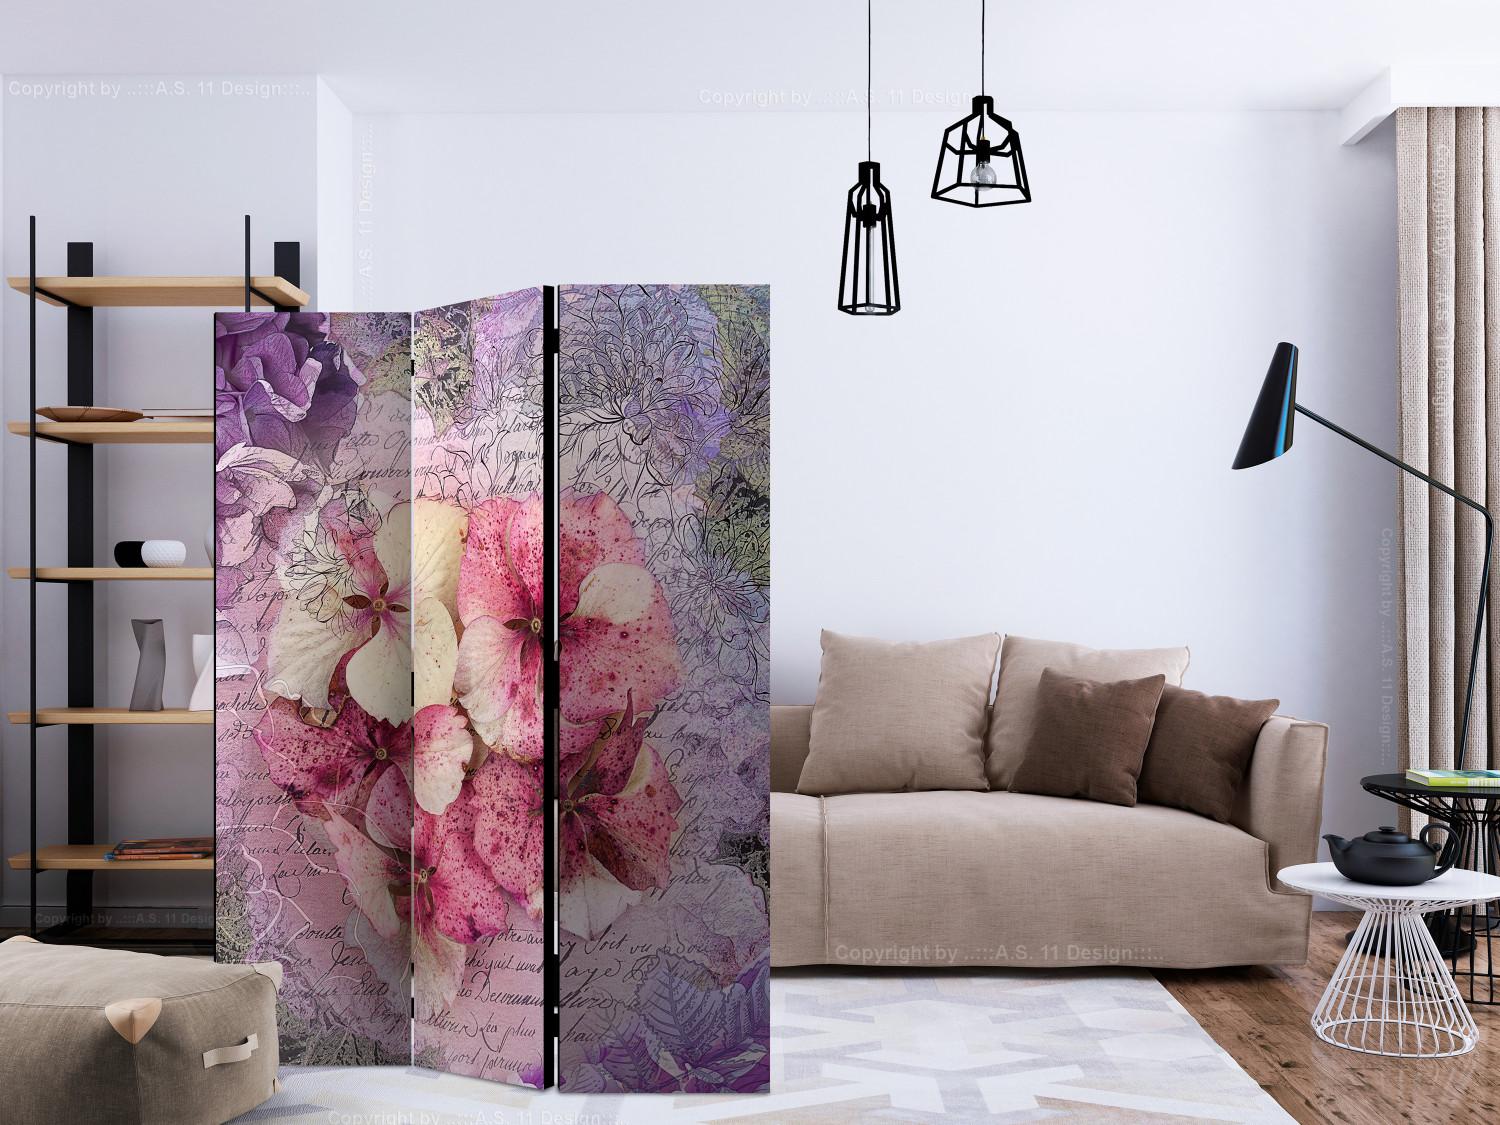 Room Divider Memory (3-piece) - pink orchids and delicate inscriptions in the background